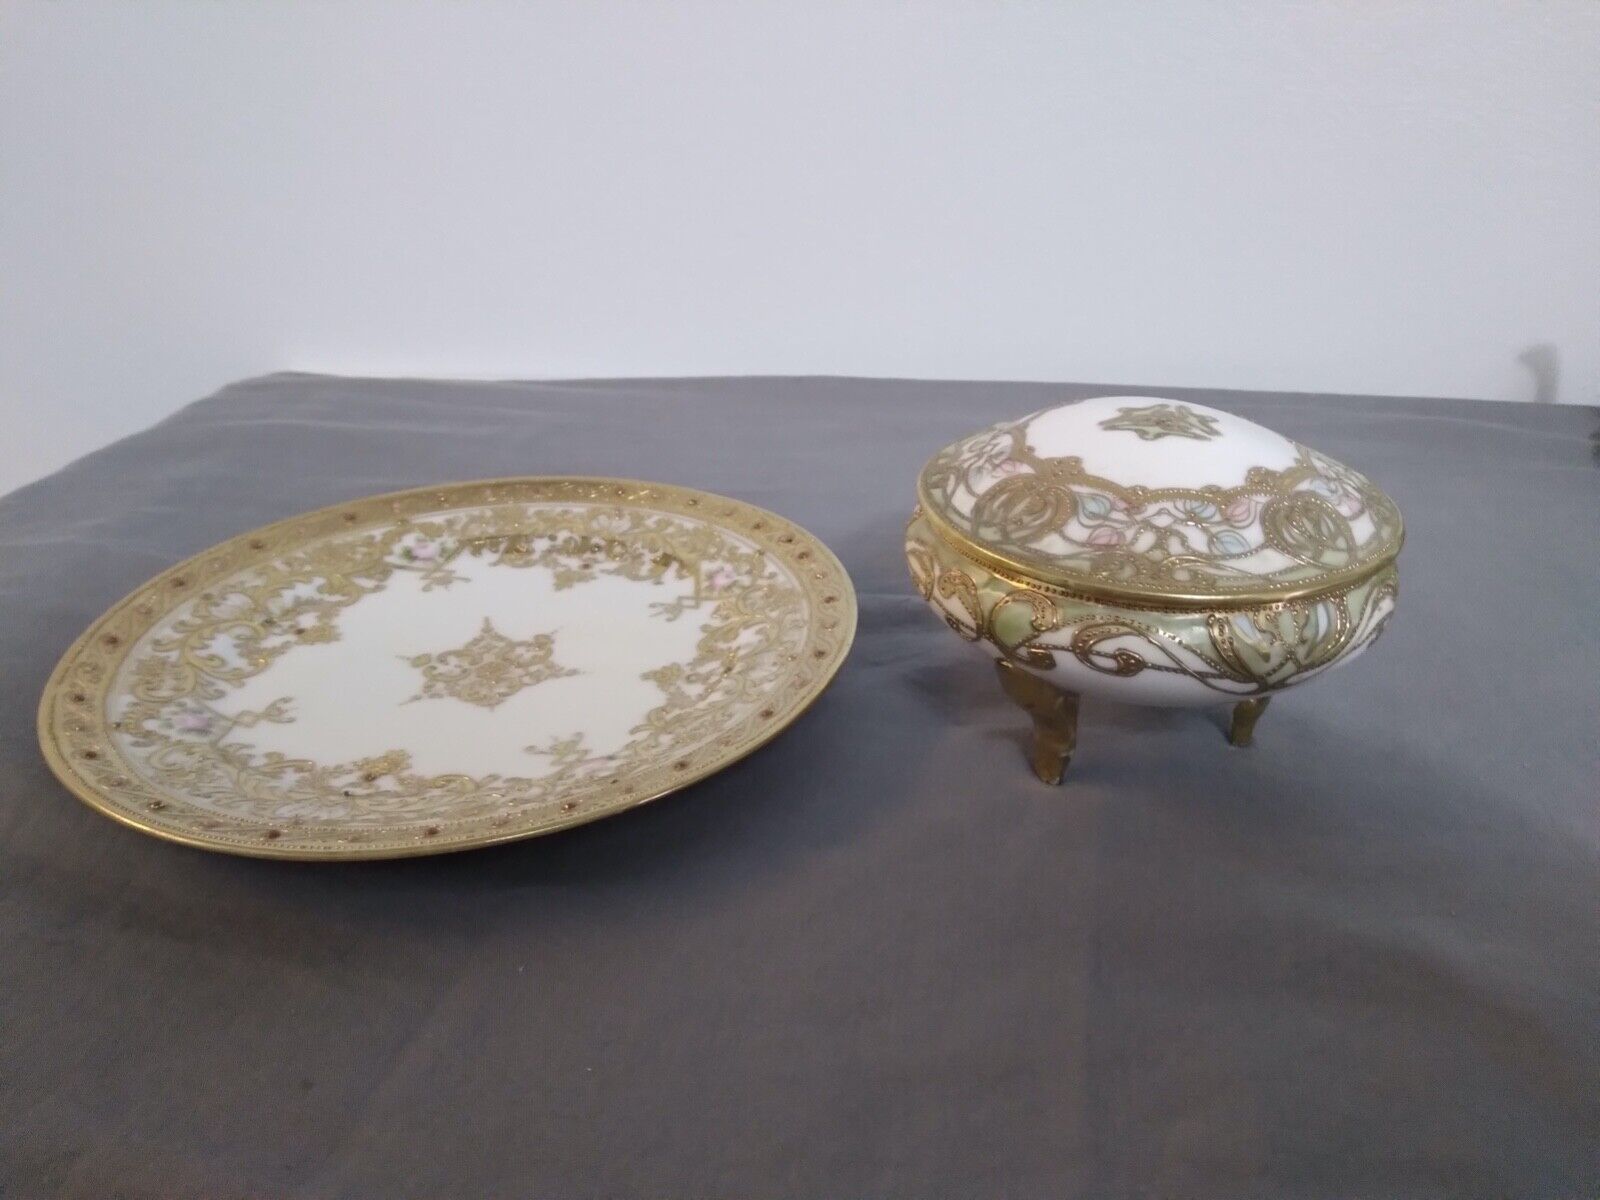 Antq. 2pc set, NORITAKE NIPPON Hand Painted Gilded Footed Trinket Dish & plate